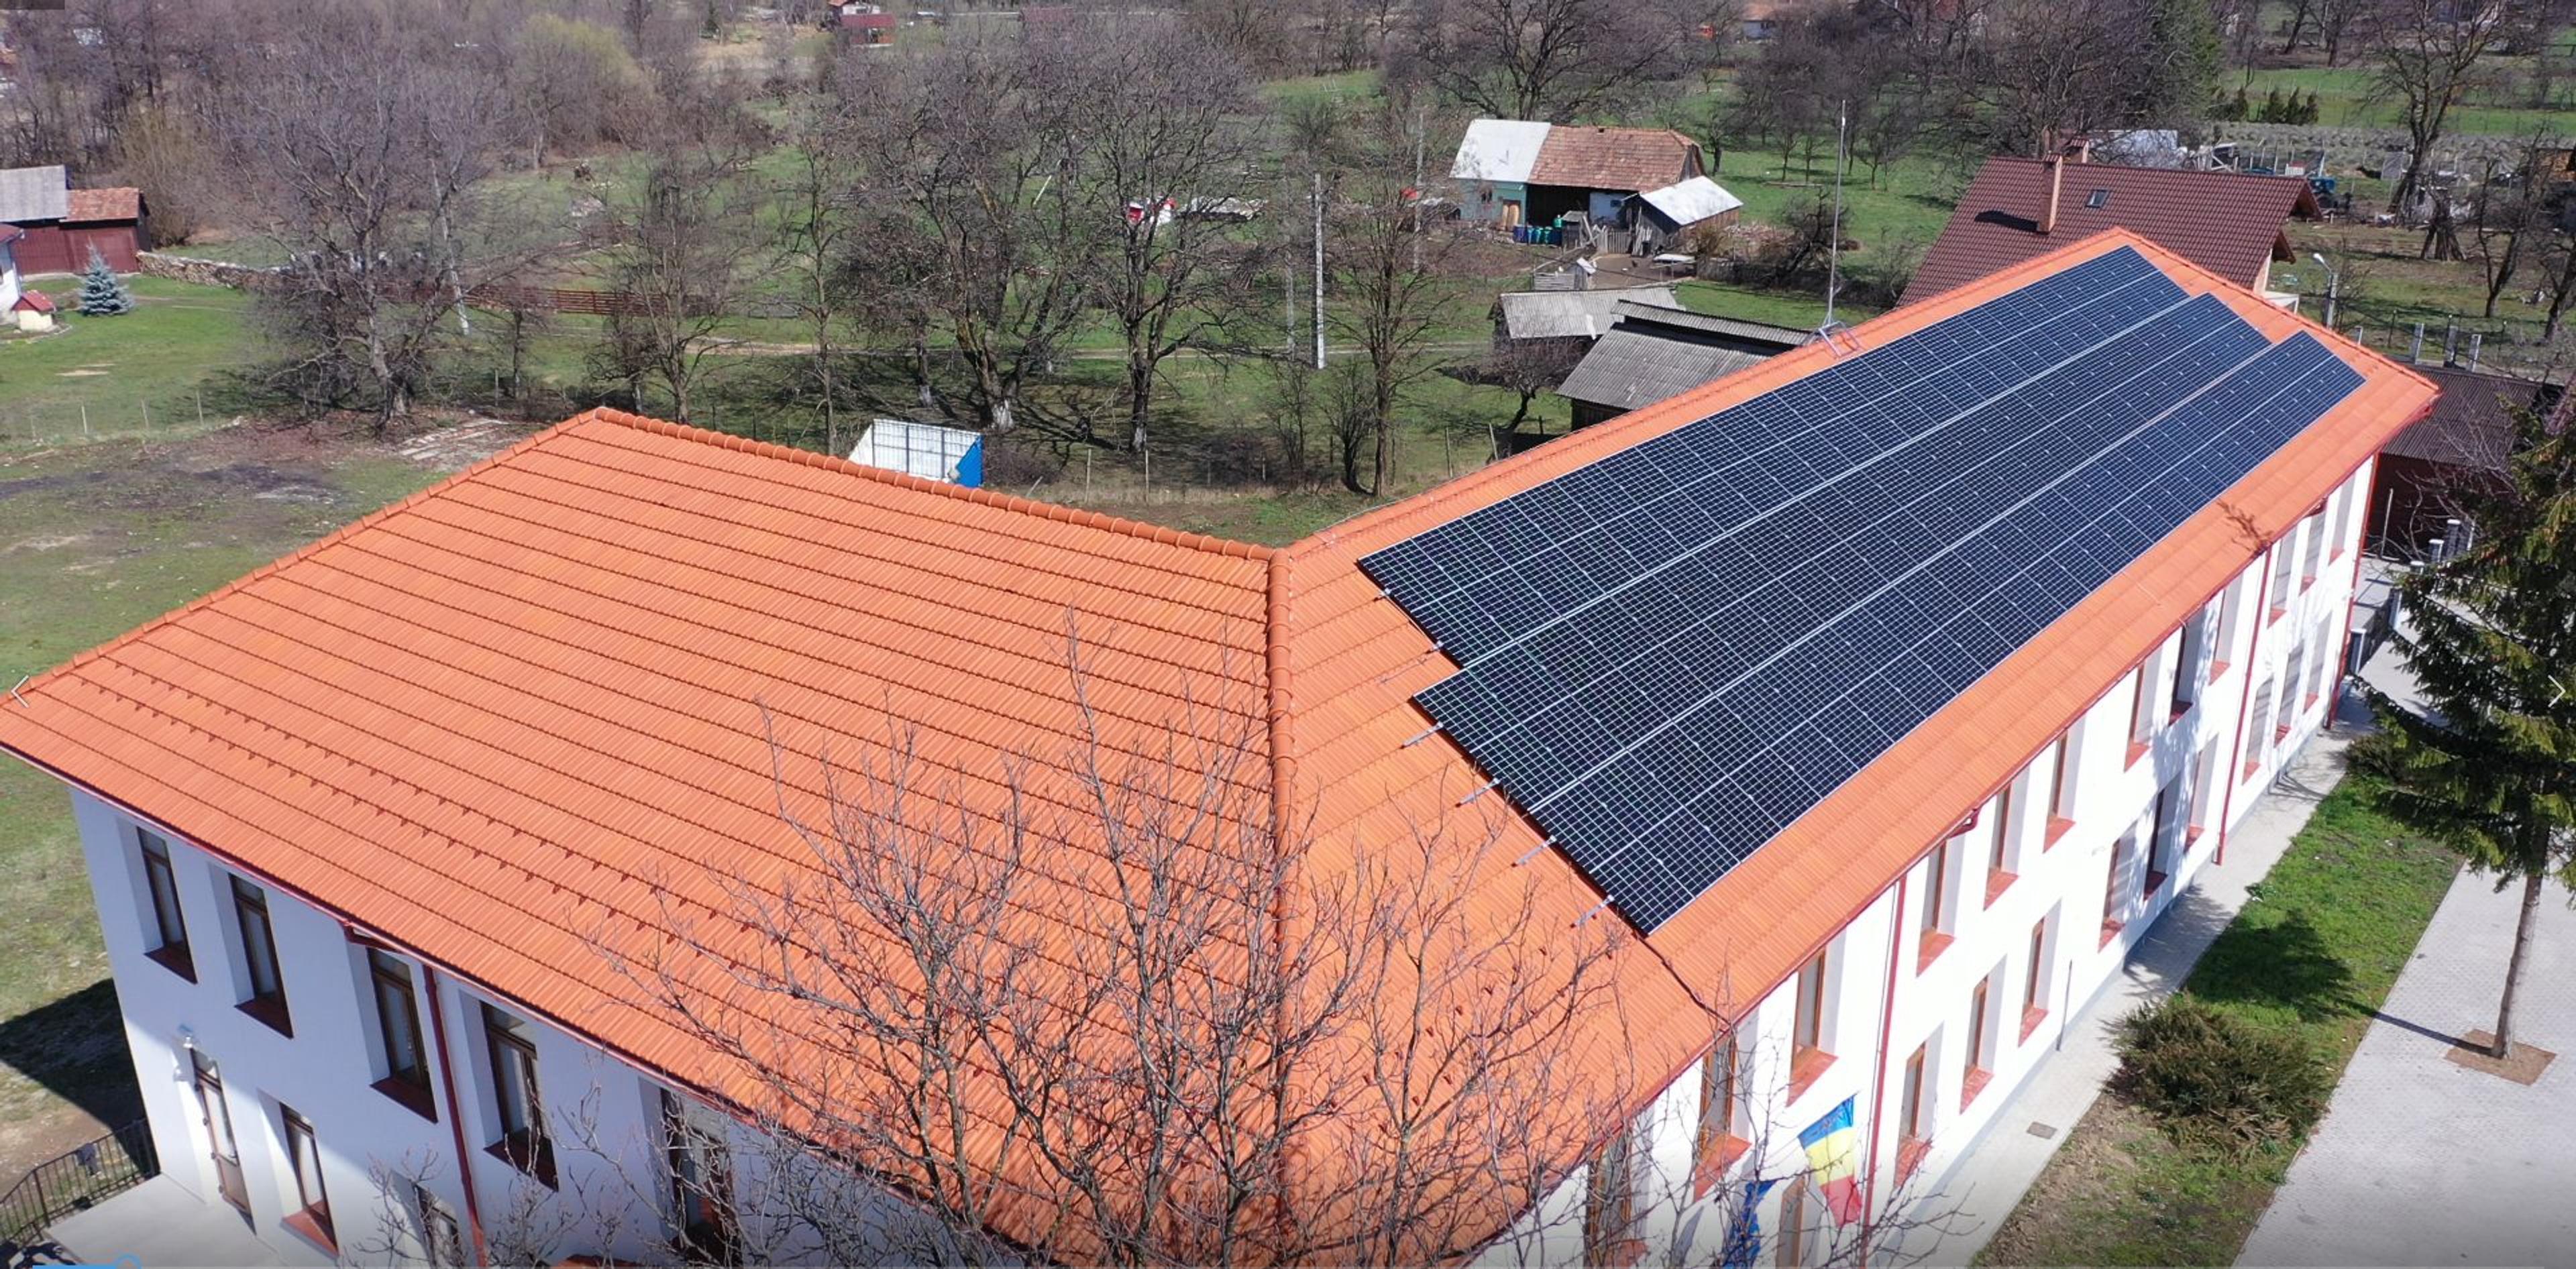 another kindergarden in Prundu Bargaului with solar panels on the roof